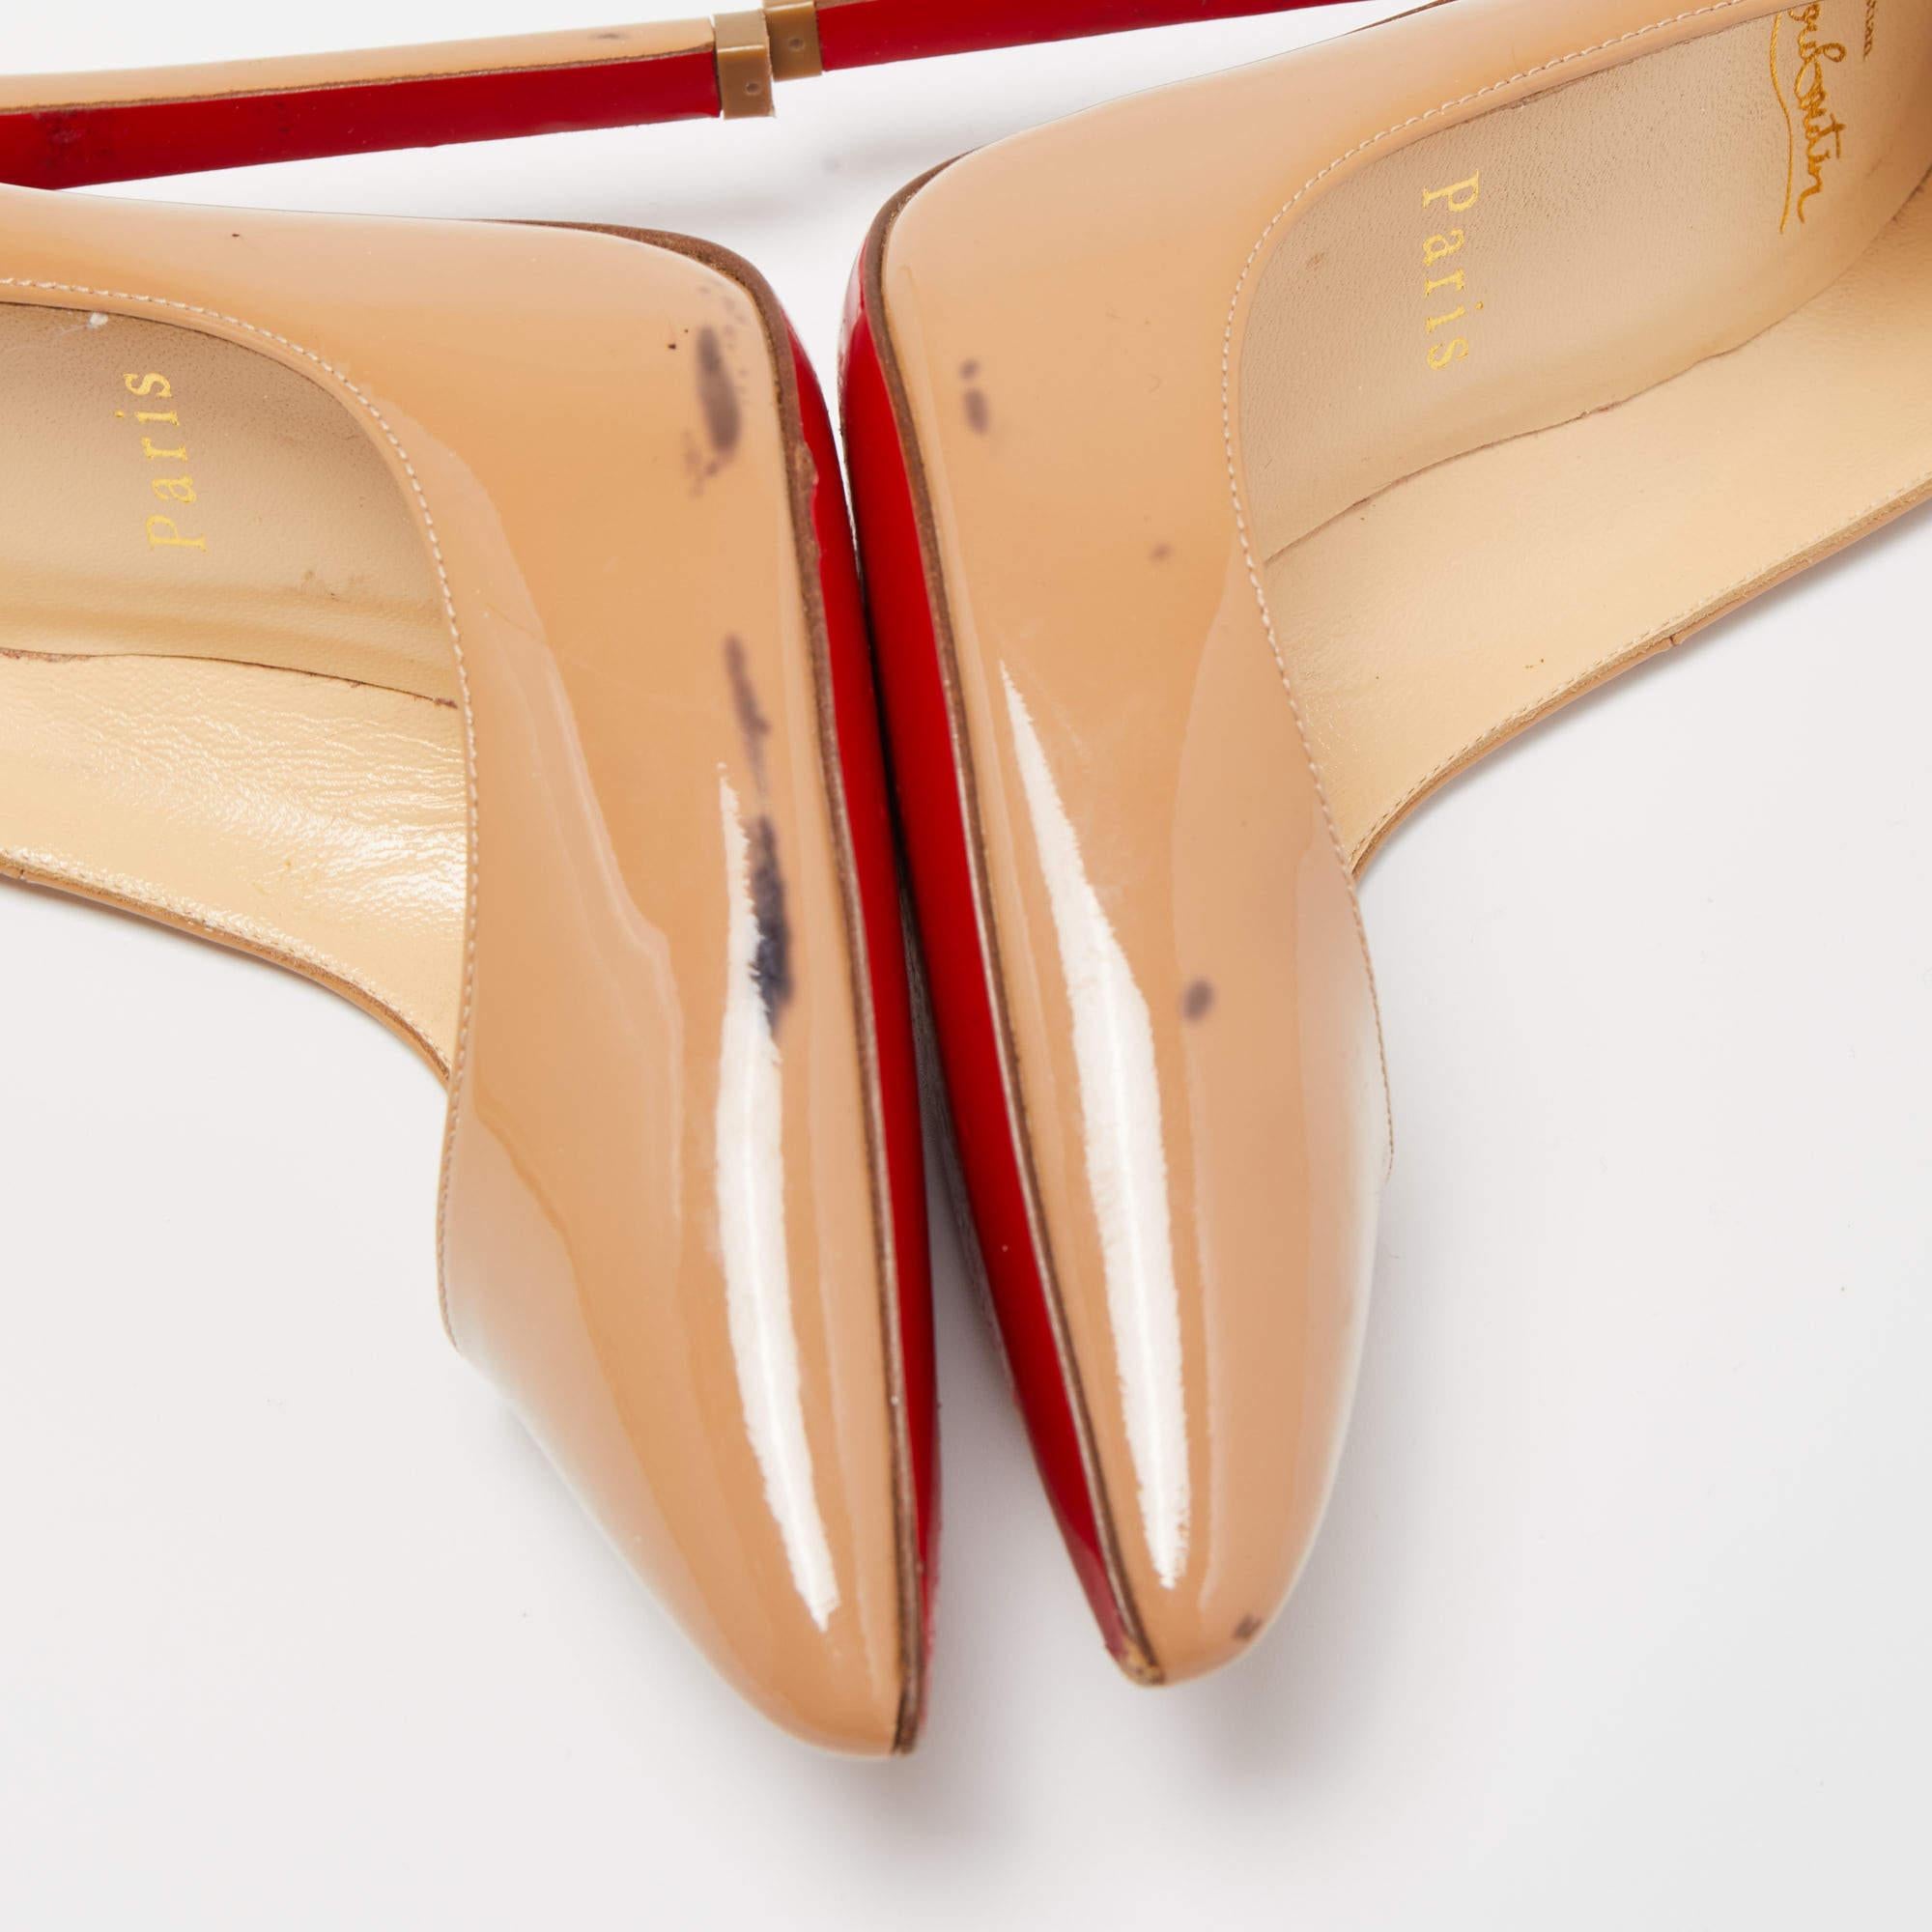 Christian Louboutin Beige Patent Leather So Kate Pointed Toe Pumps Size 37.5 For Sale 1